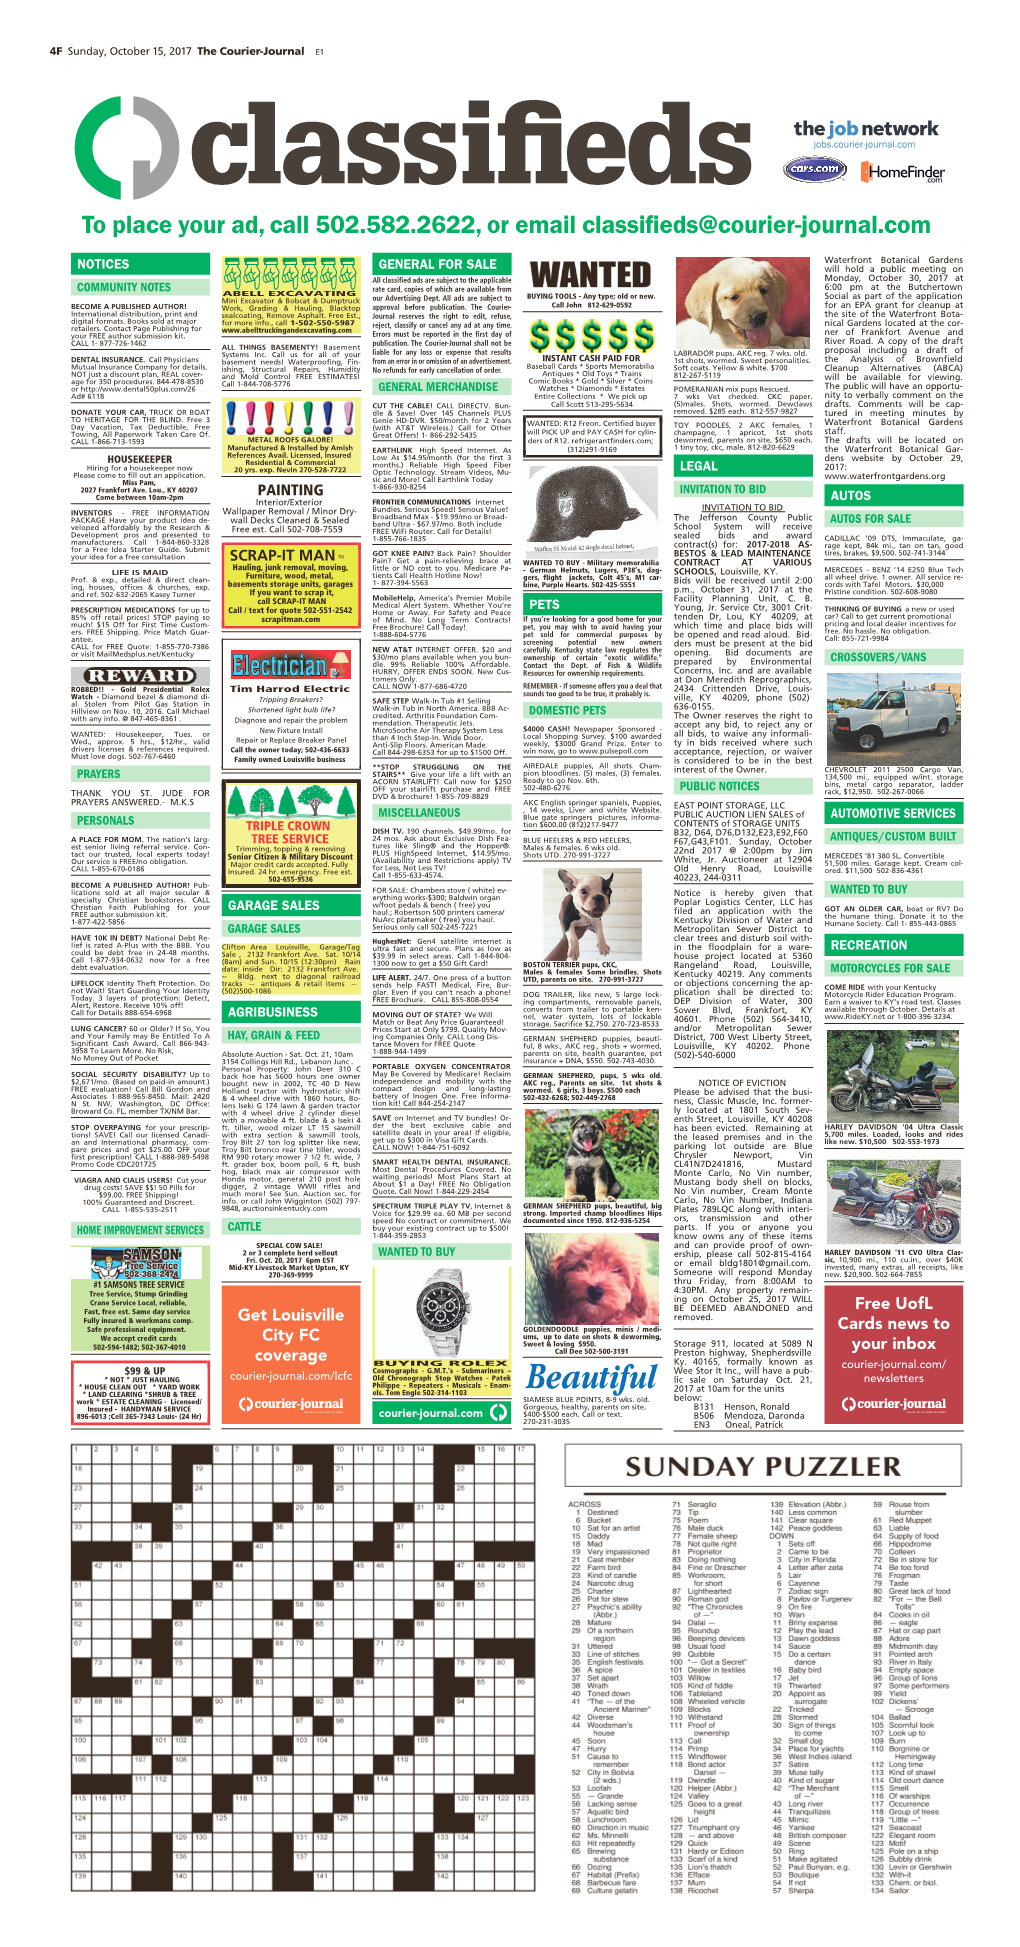 To Place Your Ad, Call 502.582.2622, Or Email Classifieds@Courier